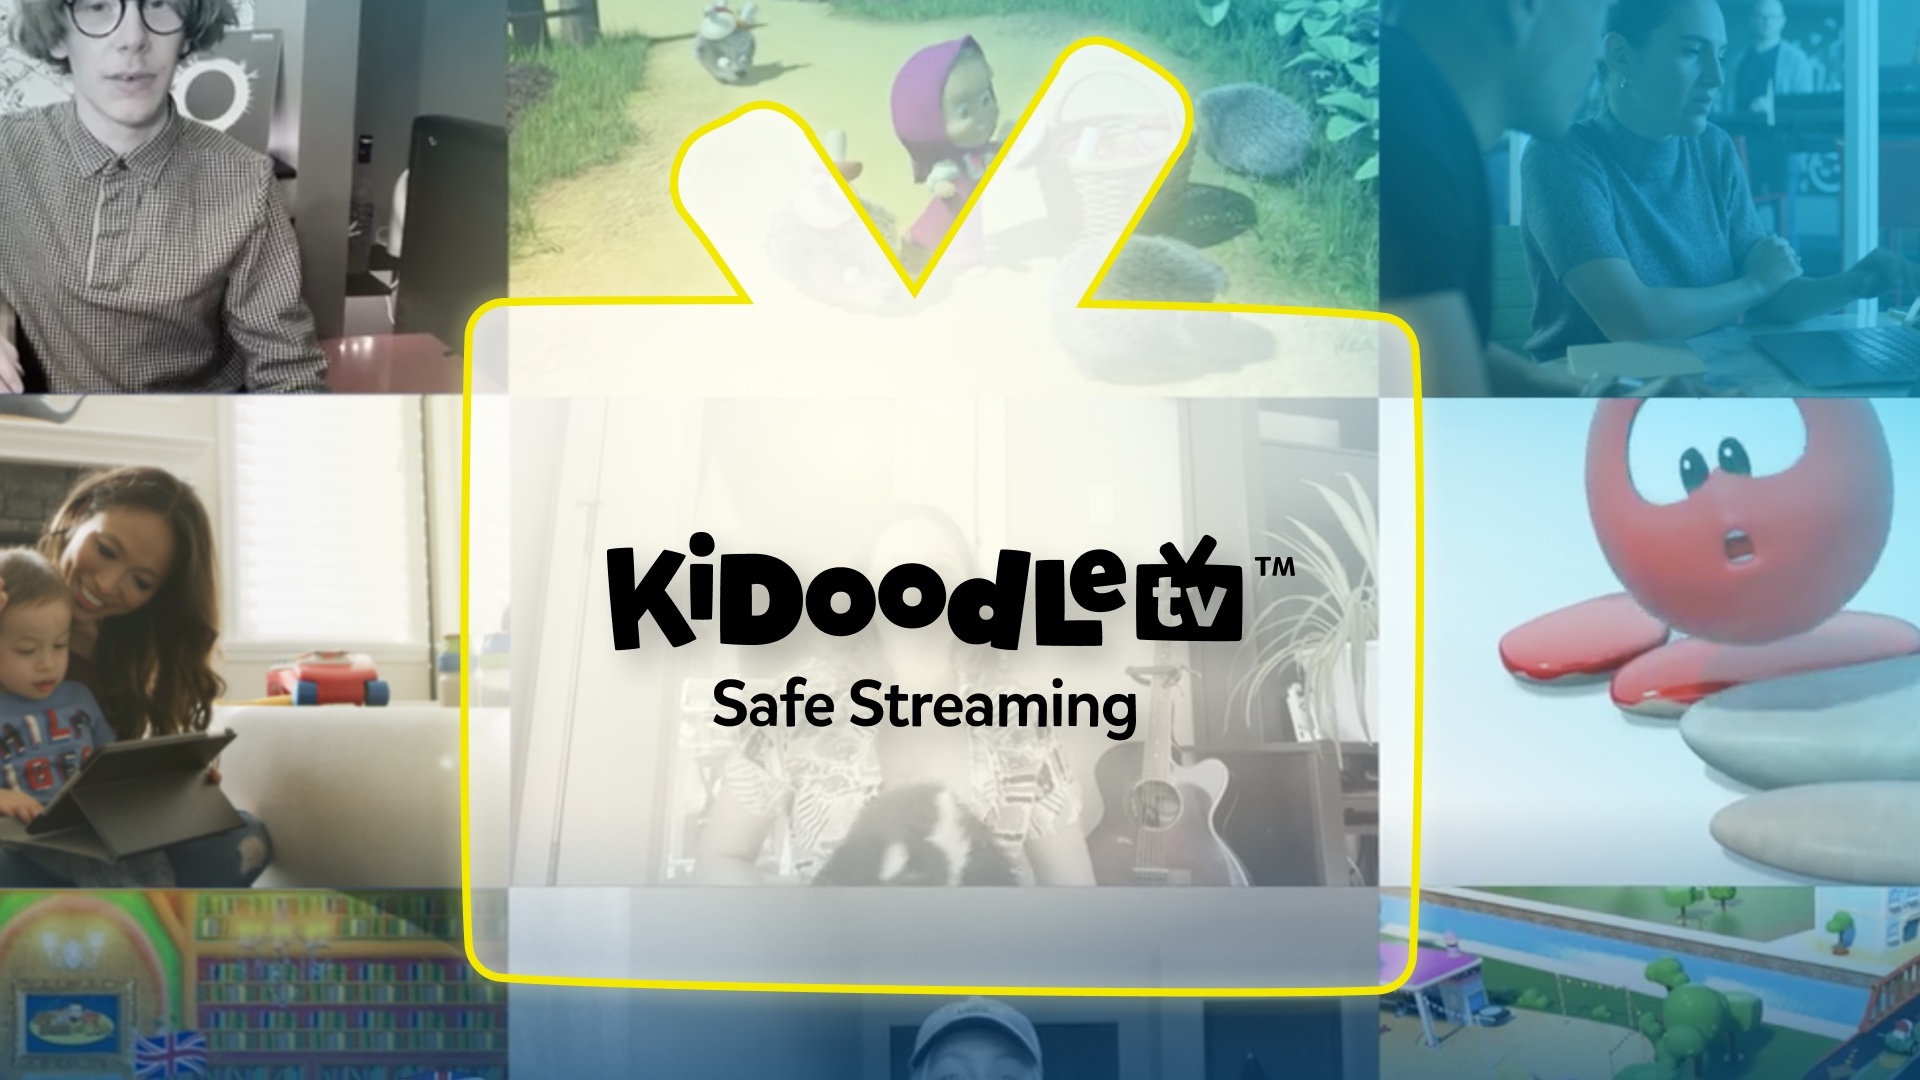 Miko and Kidoodle.TV® Collaboration Delivers Immersive Kids Experience